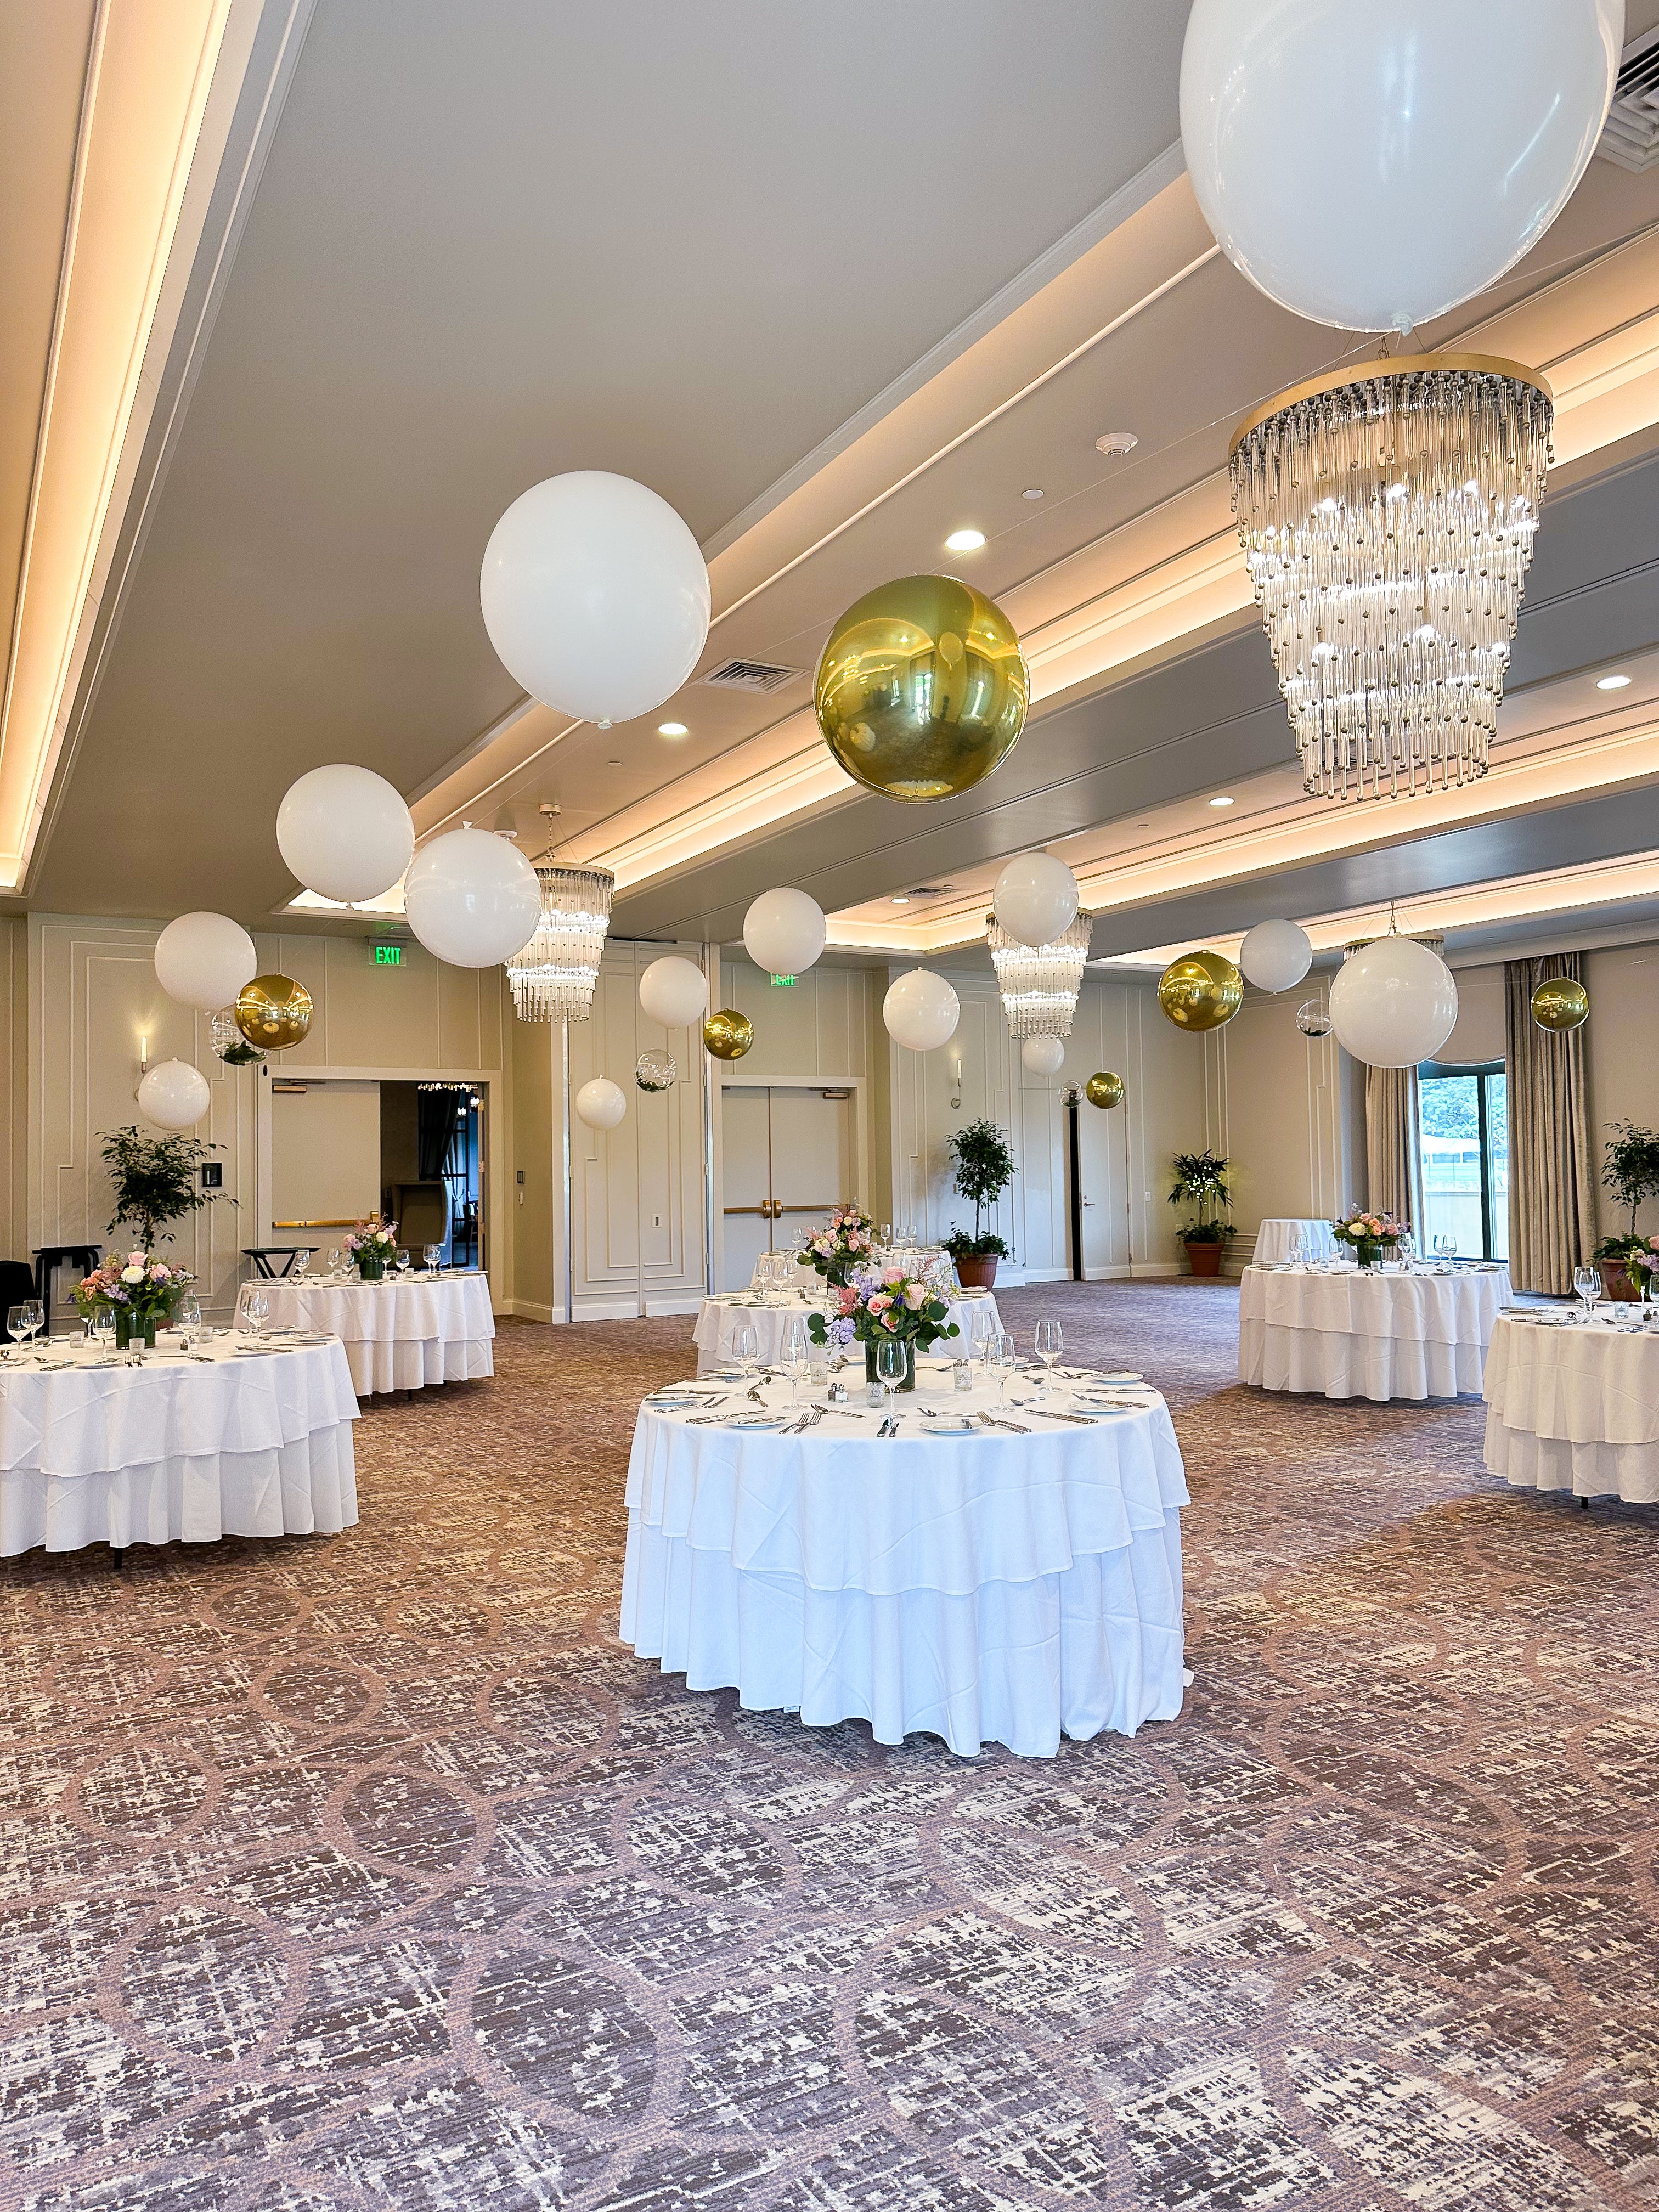 Balloon Ceiling at the Delamar Hotel for Bridal Shower, White and gold balloons for bridal shower decor